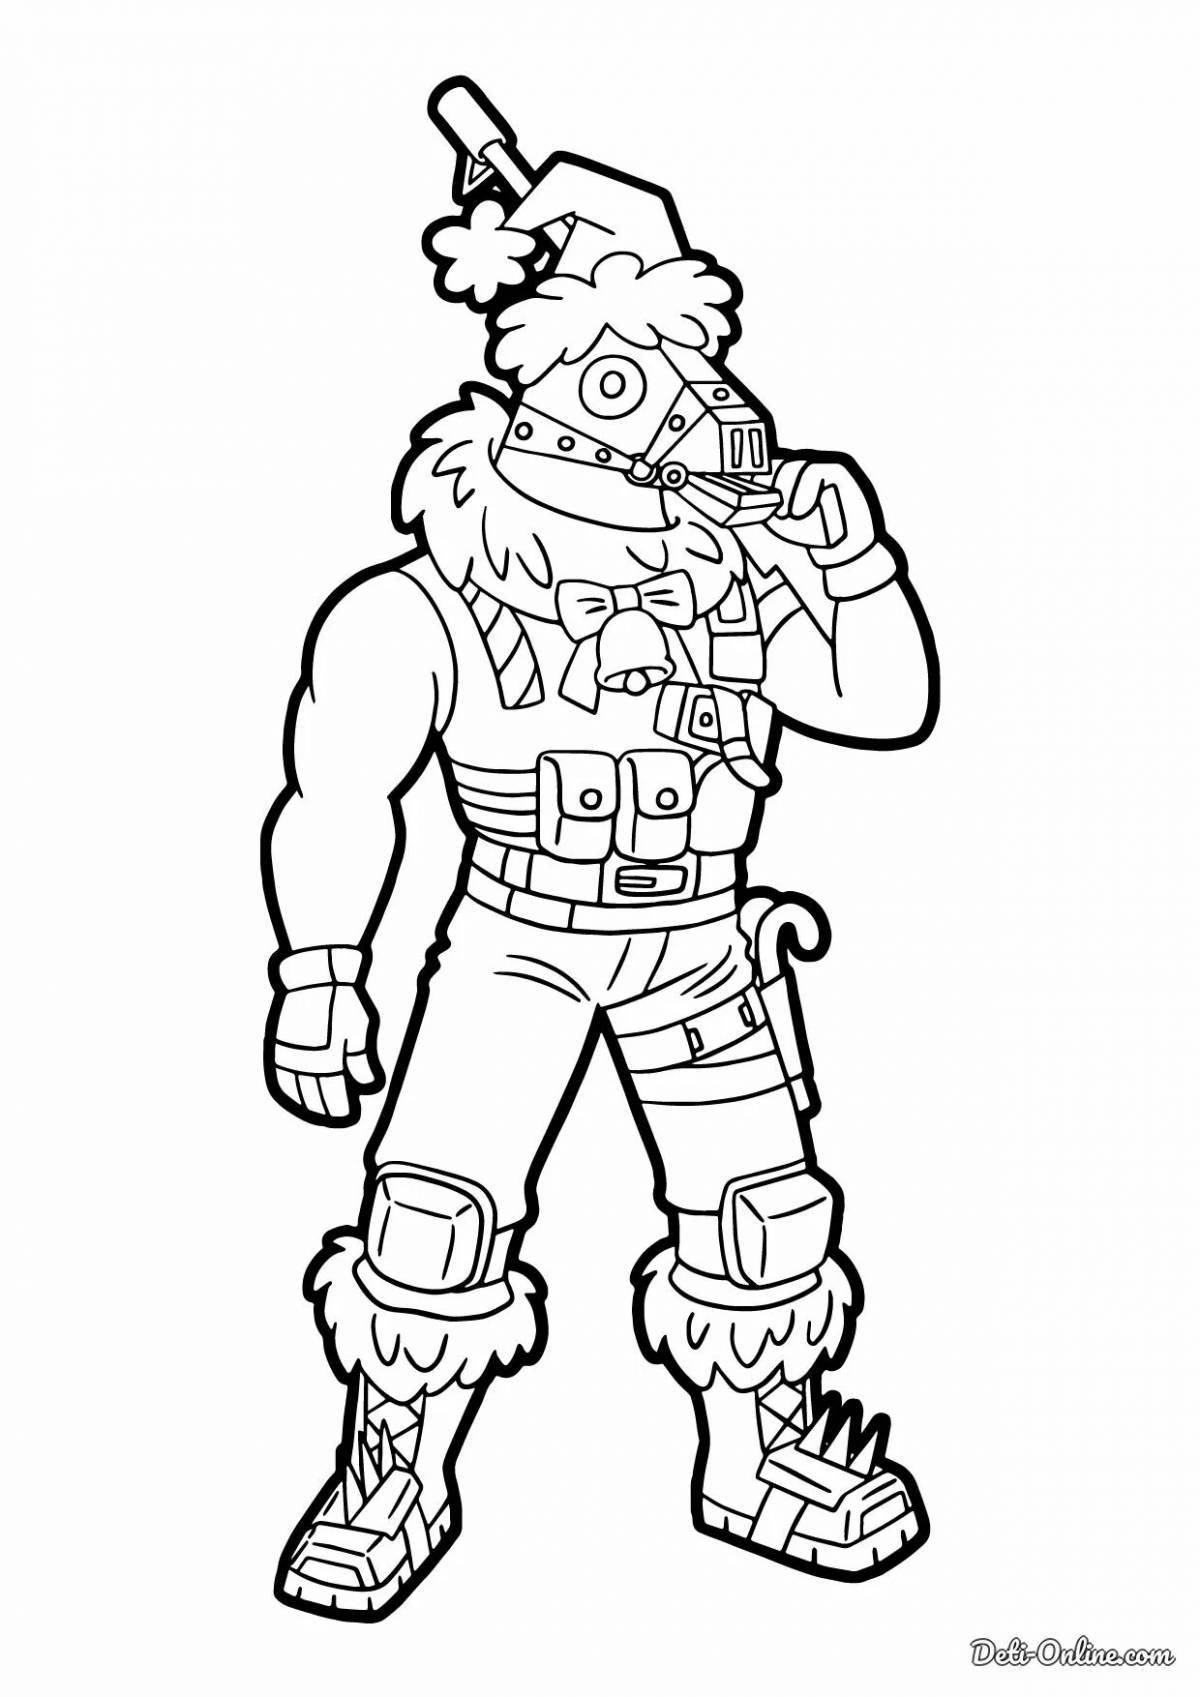 Colorable fortnite coloring page для мальчиков